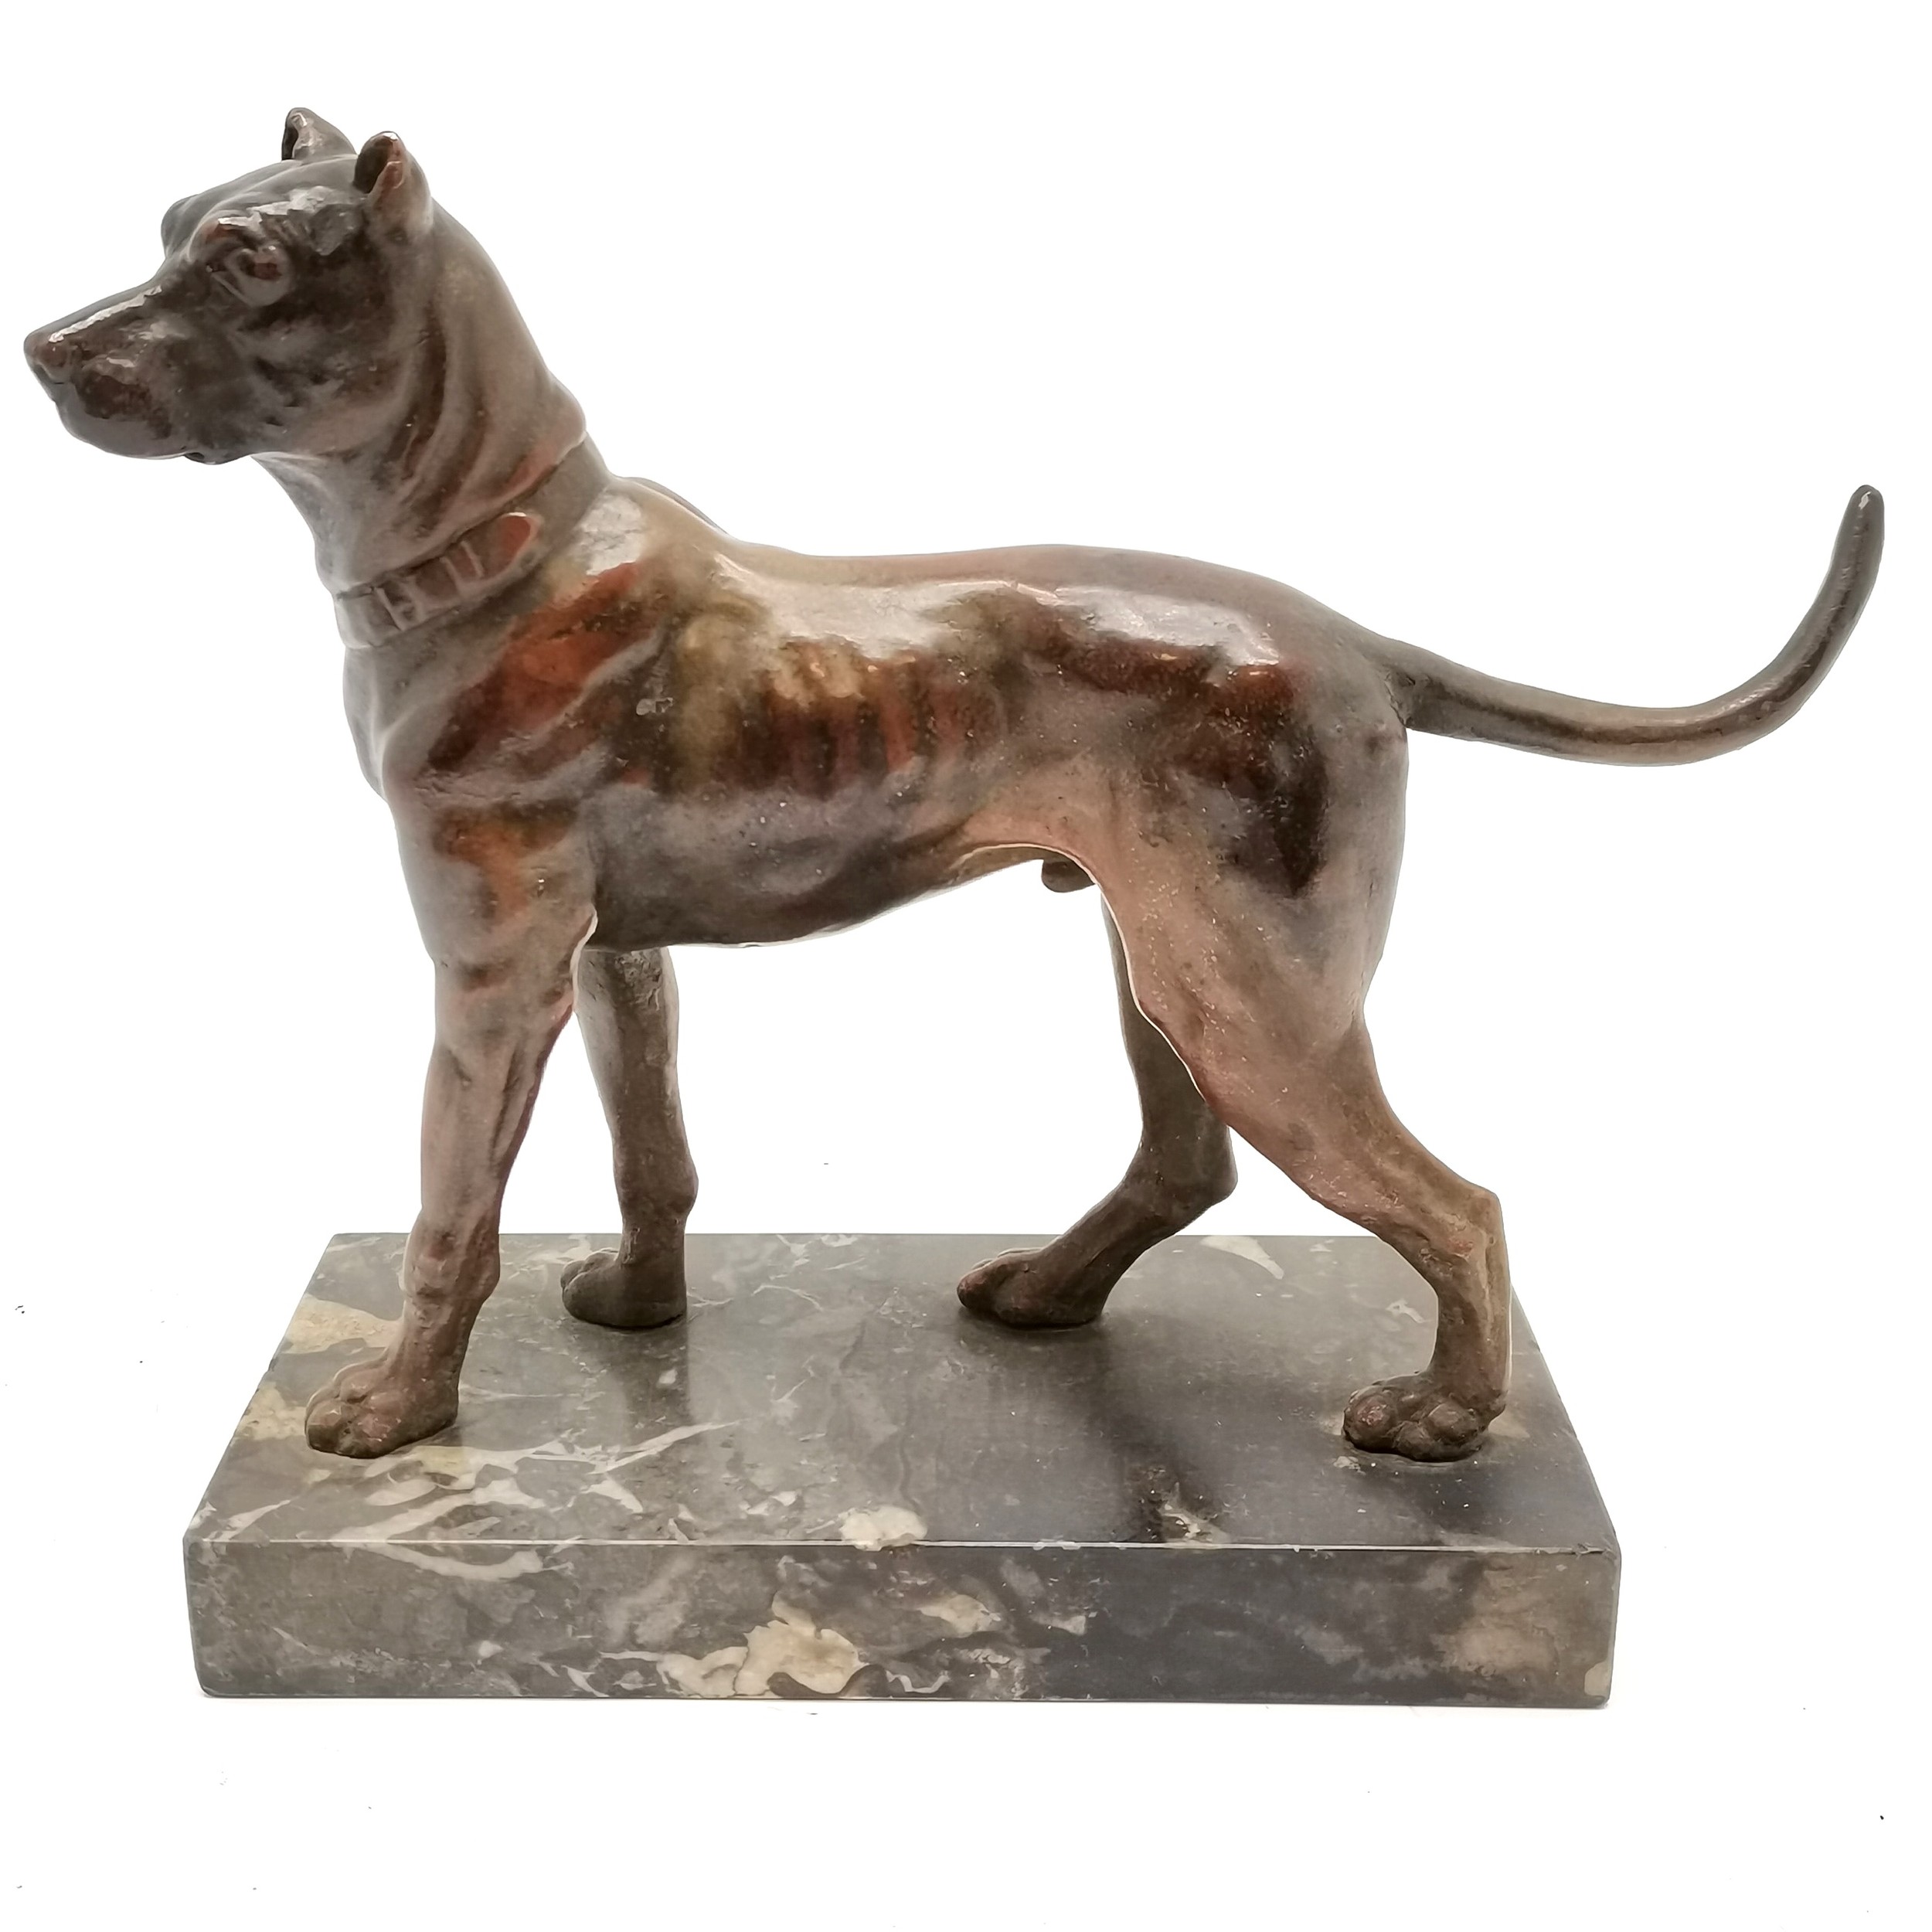 Antique spelter figure of a dog on a marble base - 16.5cm high and base 15cm x 8cm - Image 4 of 4